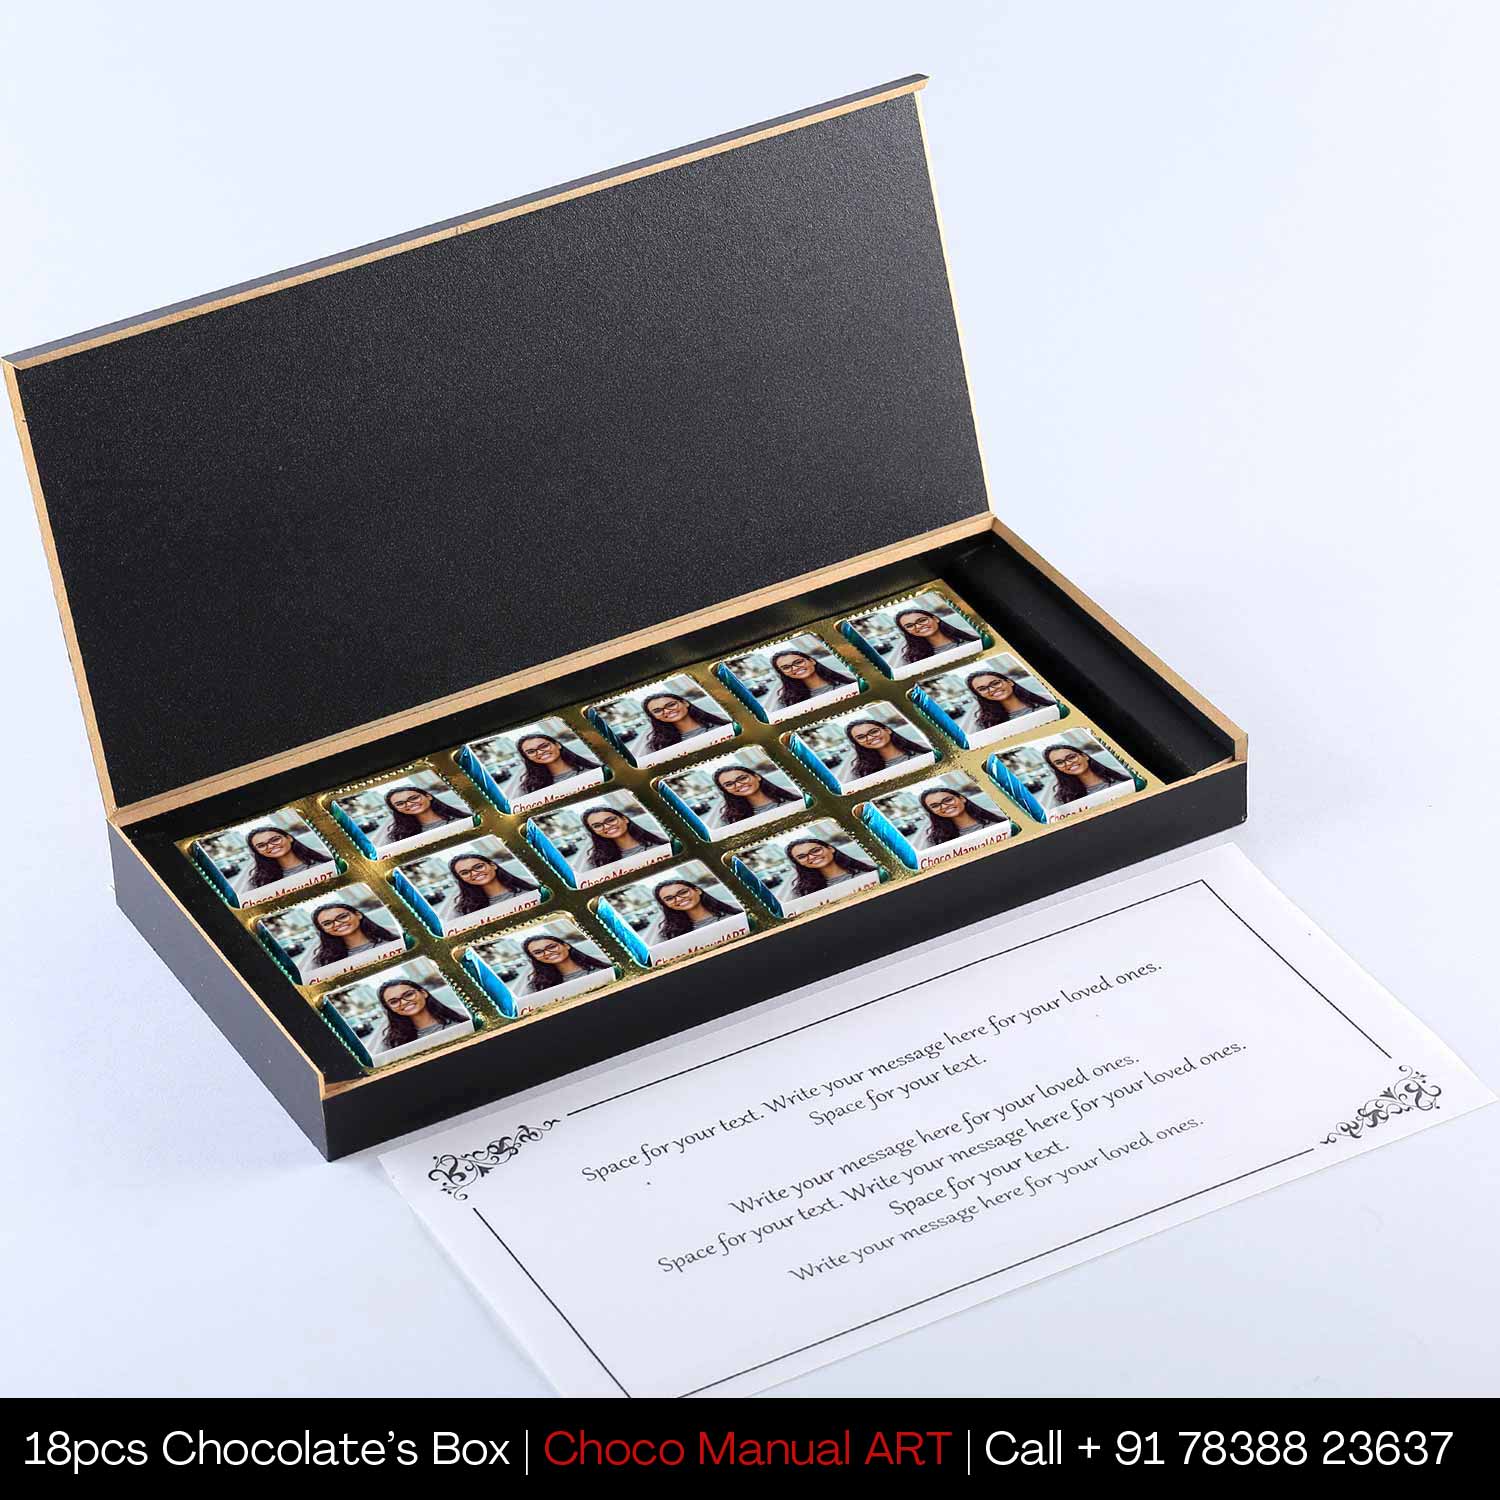 The Customised gifts with the Photo chocolate